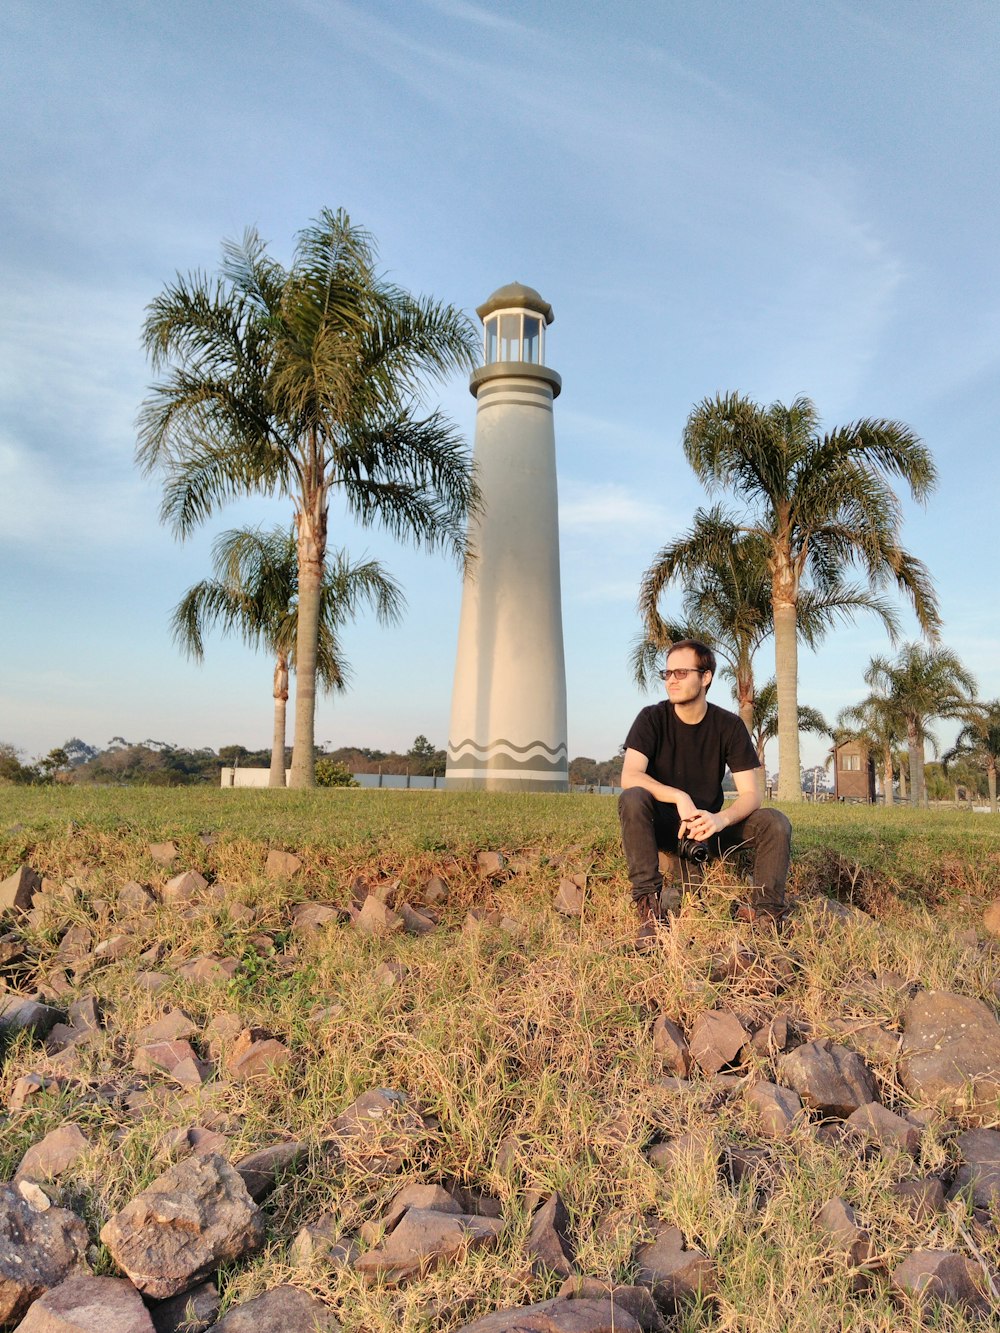 a man sitting in a field next to a light house